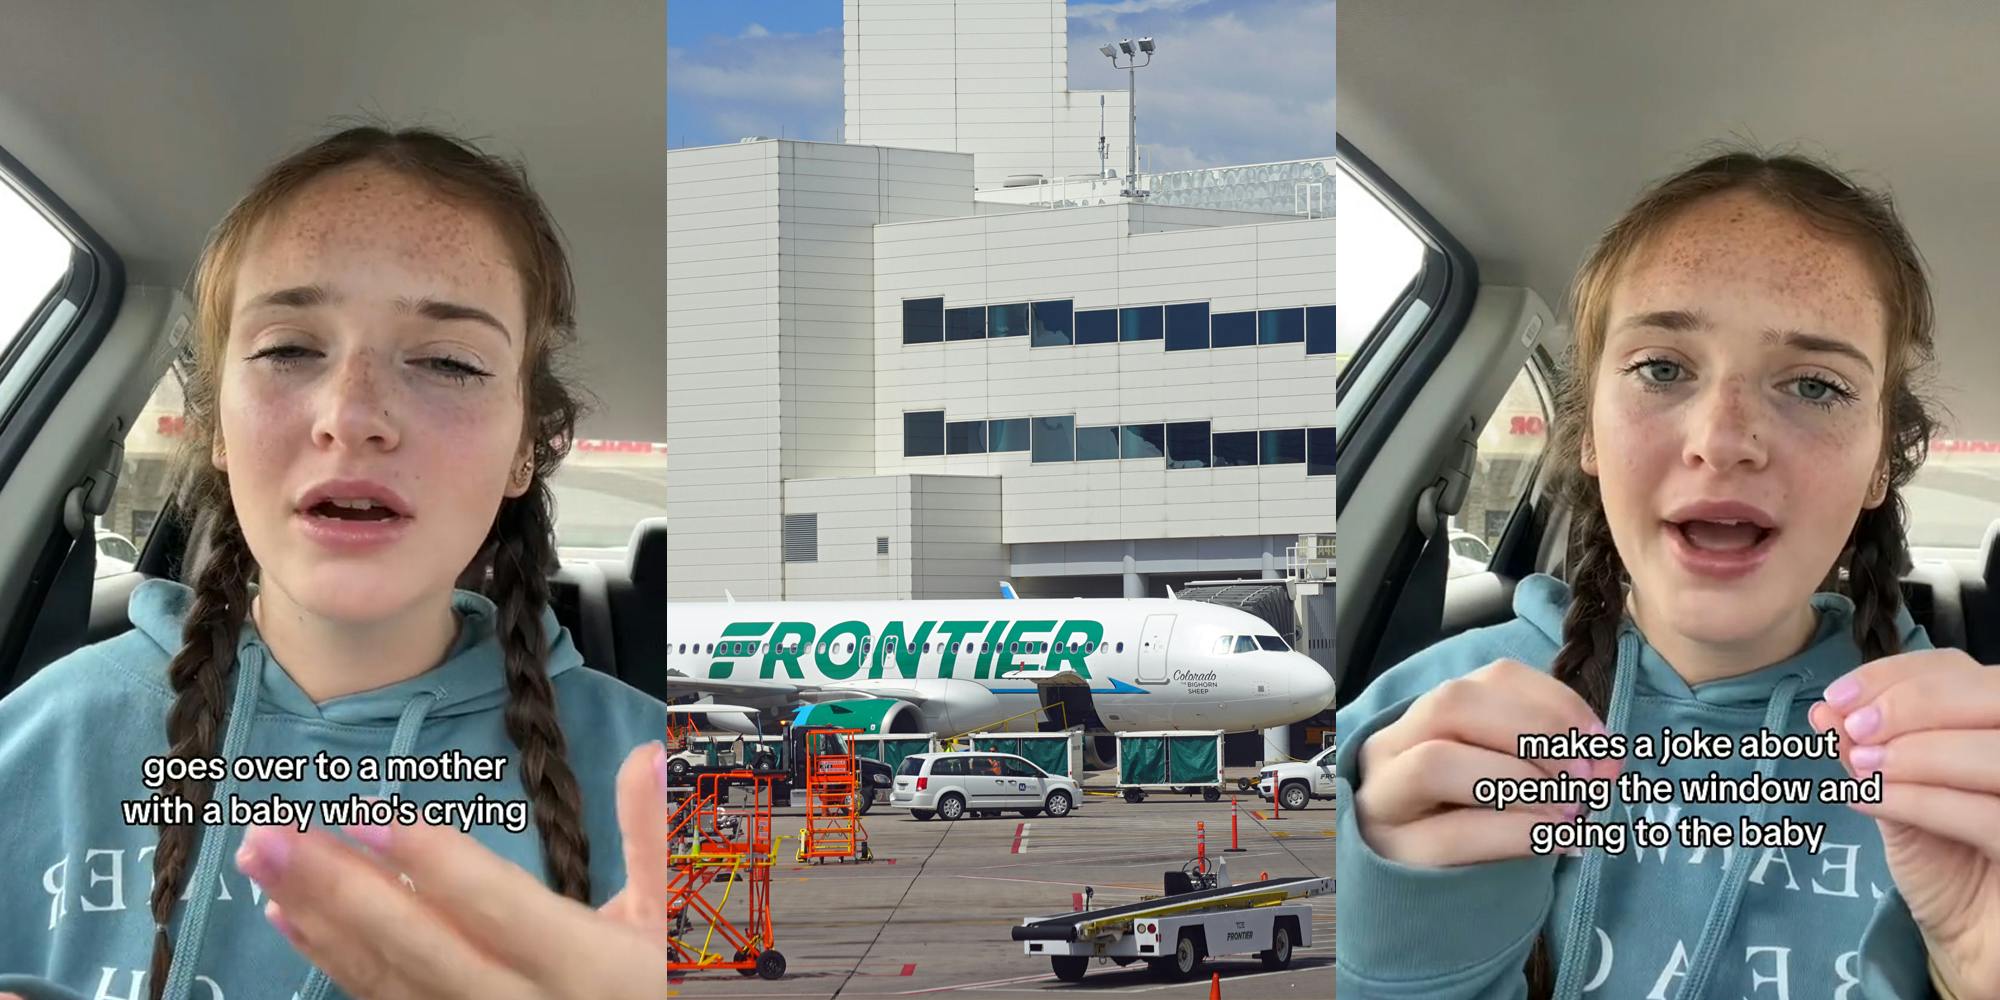 Frontier passenger speaking in car with caption "goes over to a mother with a baby who's crying" (l) Frontier plane in runway (c) Frontier passenger speaking in car with caption "makes a joke about opening the window and going to the baby